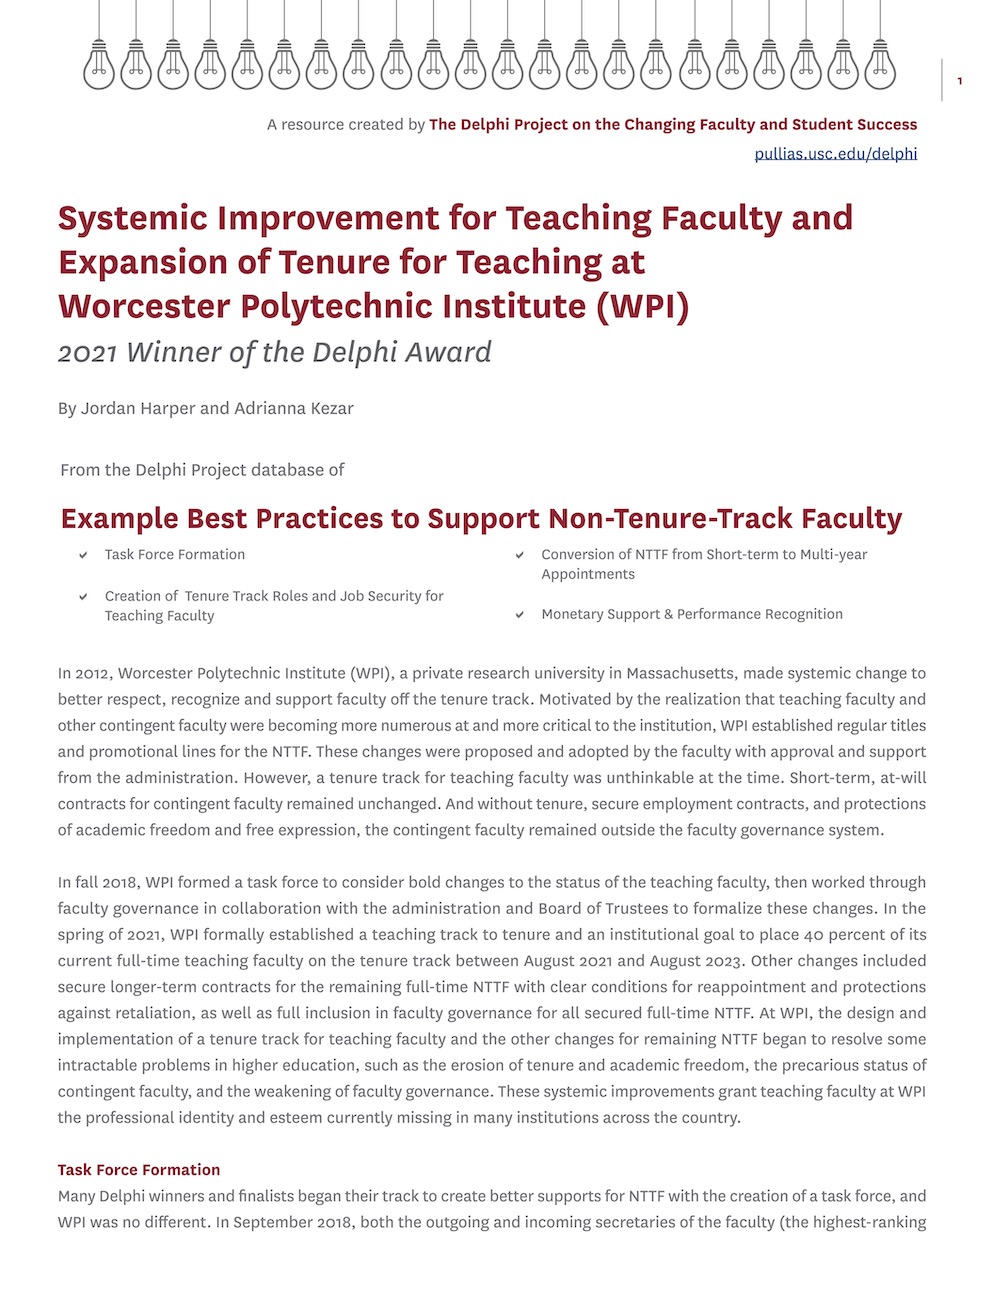 Systemic Improvement for Teaching Faculty and Expansion of Tenure for Teaching at Worcester Polytechnic Institute (WPI)